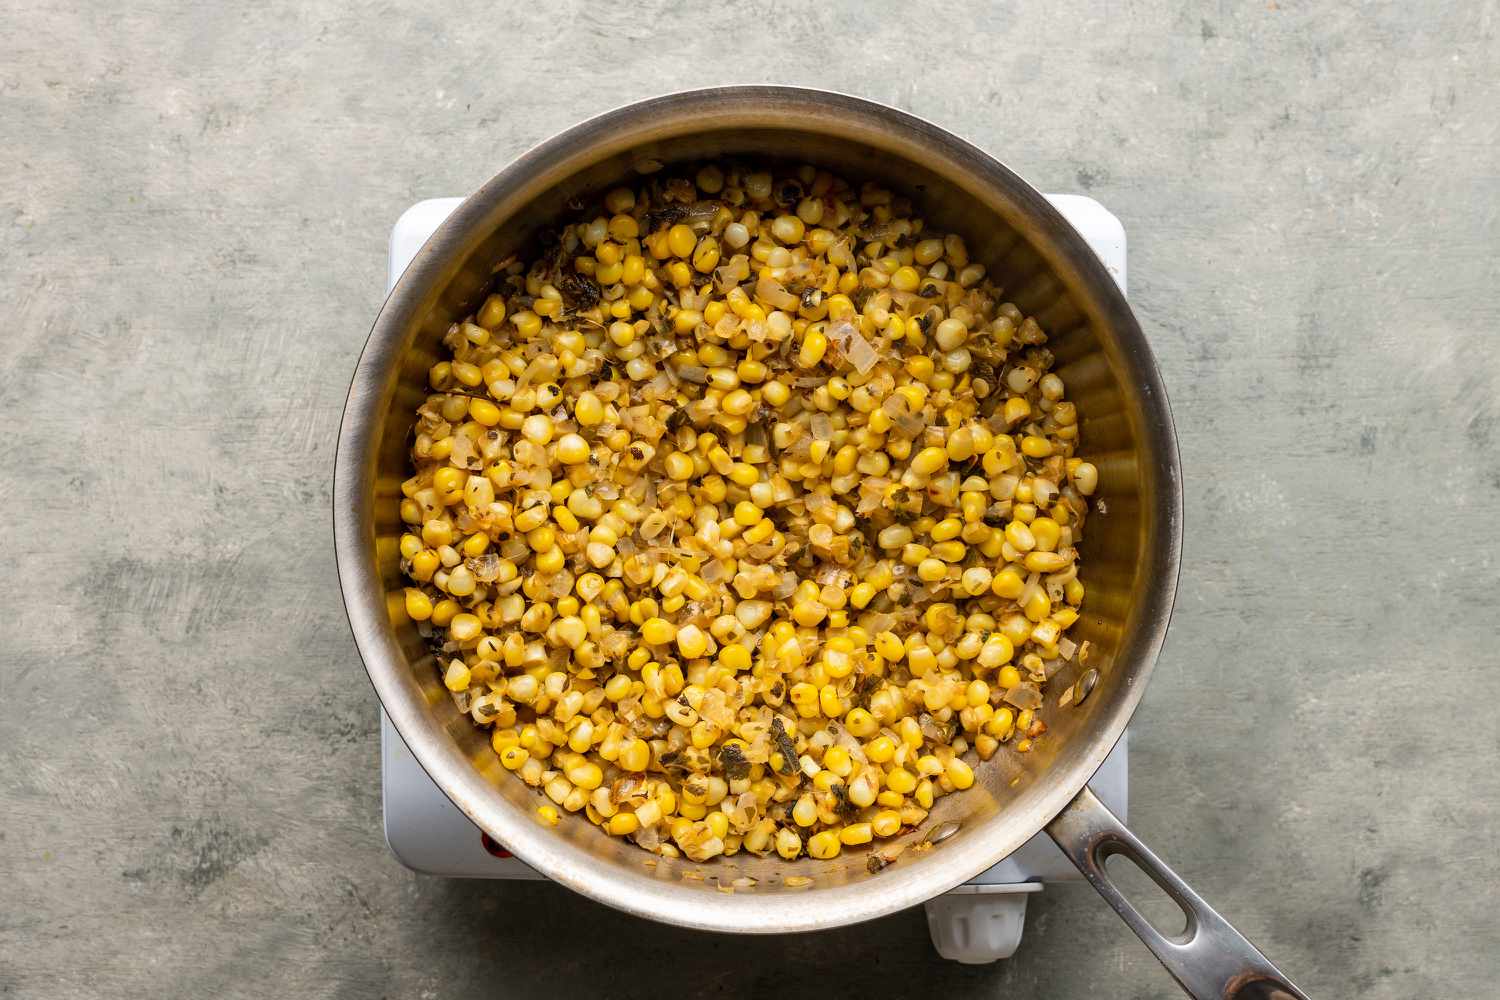 Corn mixture cooking in a pot on the burner 